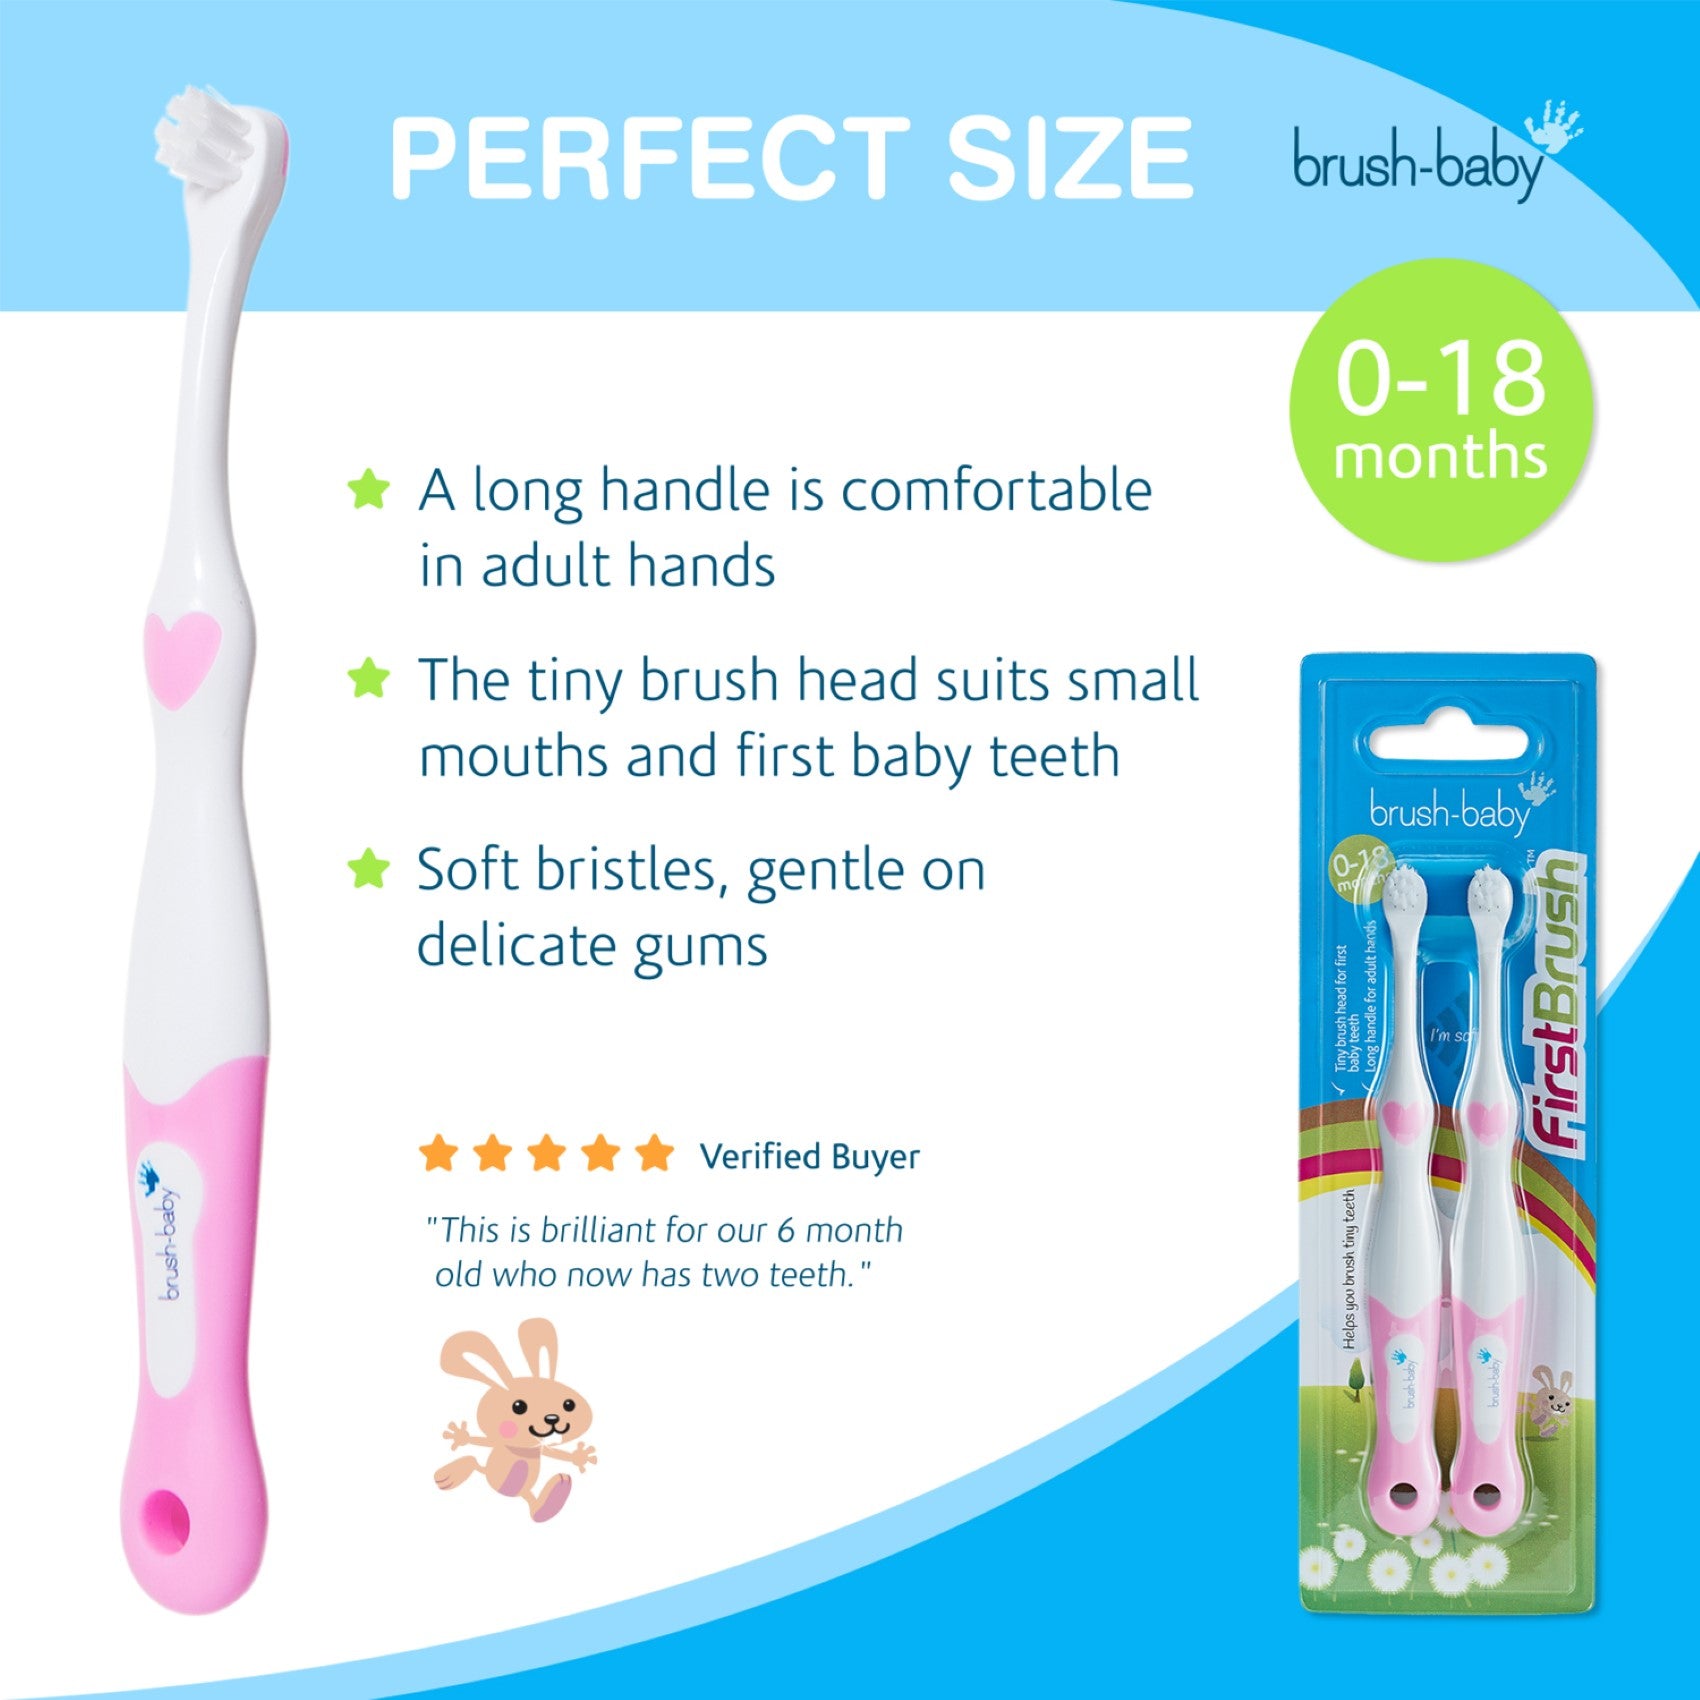 Brush-Baby First Brush (Mixed Colours, Pack of 2)